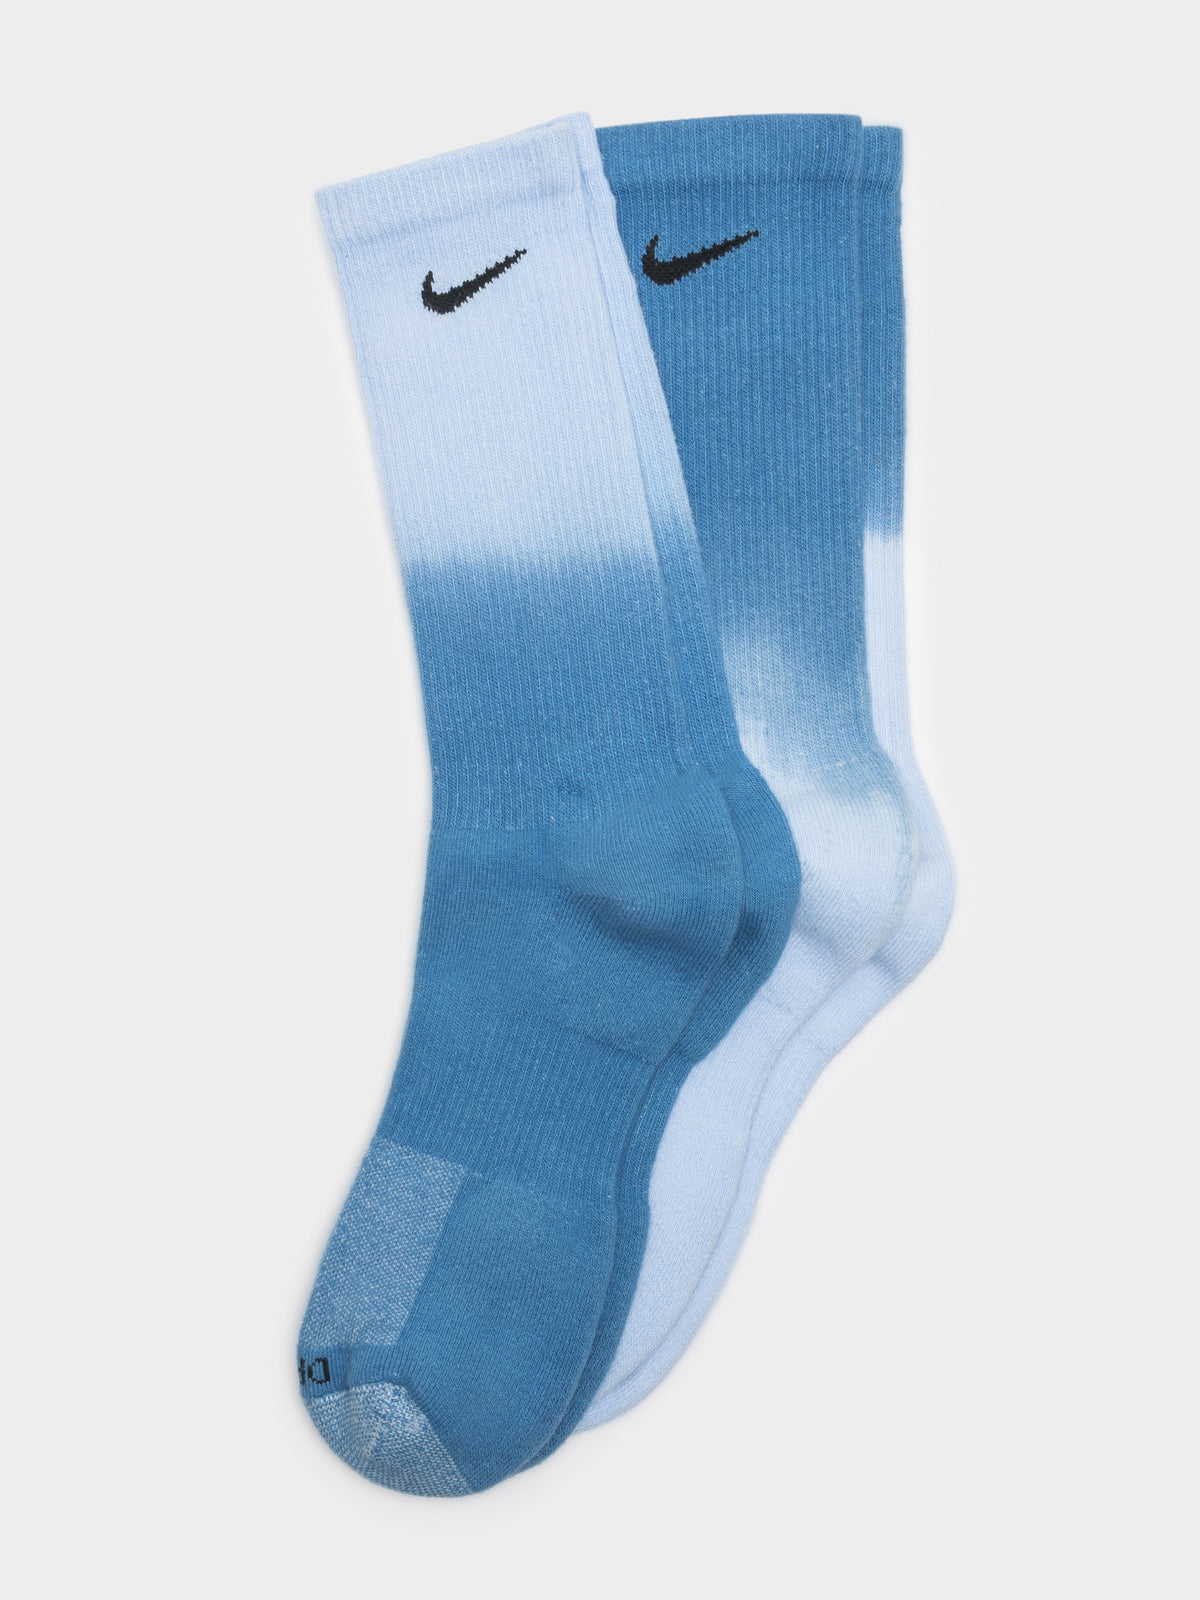 2 Pairs of Everyday Plus Cushion Socks in Blue